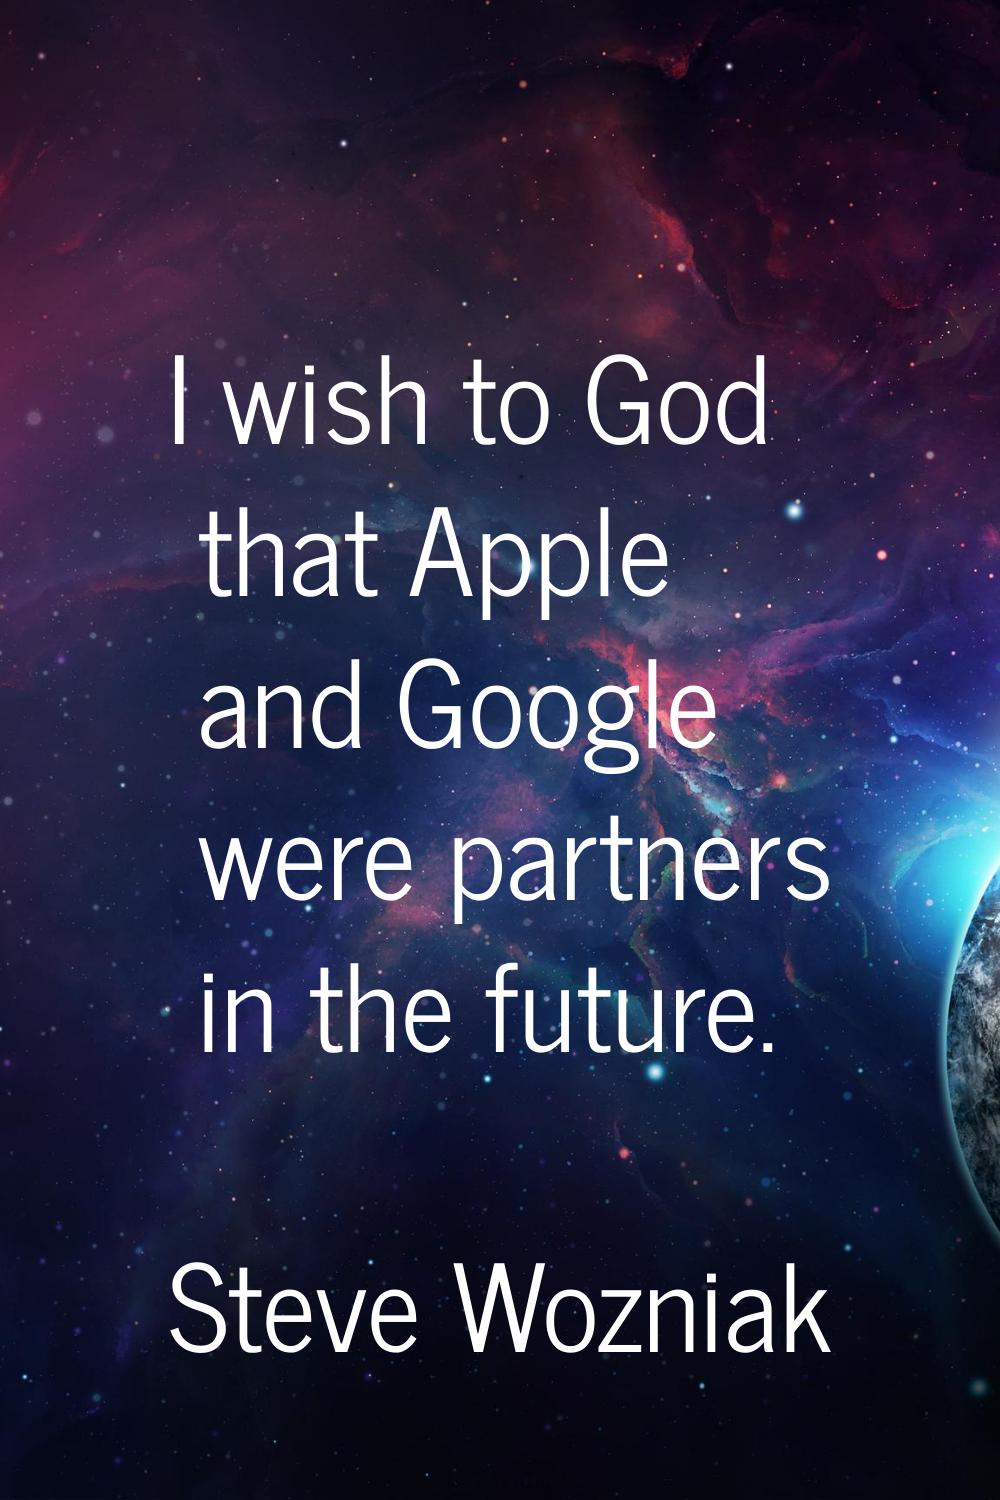 I wish to God that Apple and Google were partners in the future.